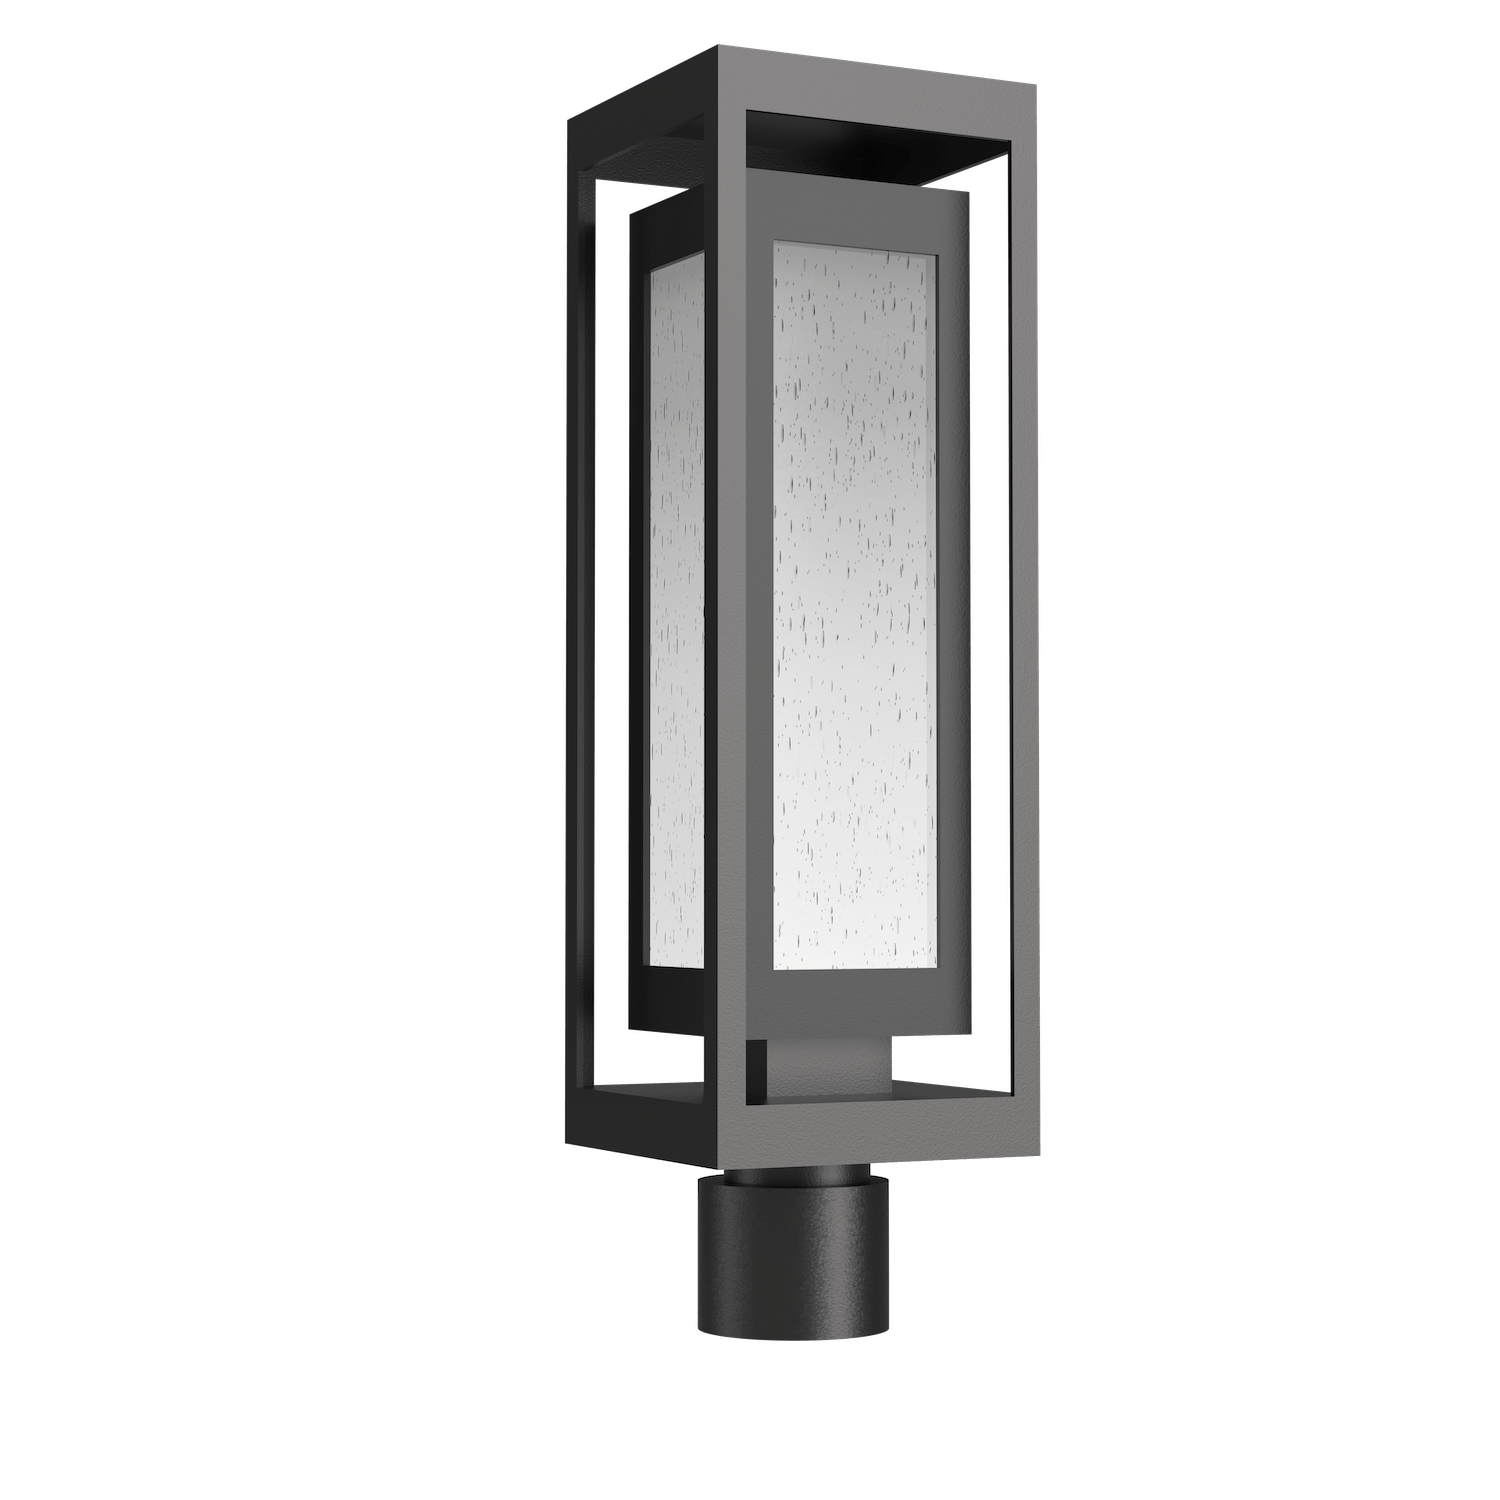 OMB0027-01-AG-FS-Hammerton-Studio-Double-Box-21-inch-postmount-light-with-argento-grey-finish-and-frosted-glass-shade-and-LED-lamping